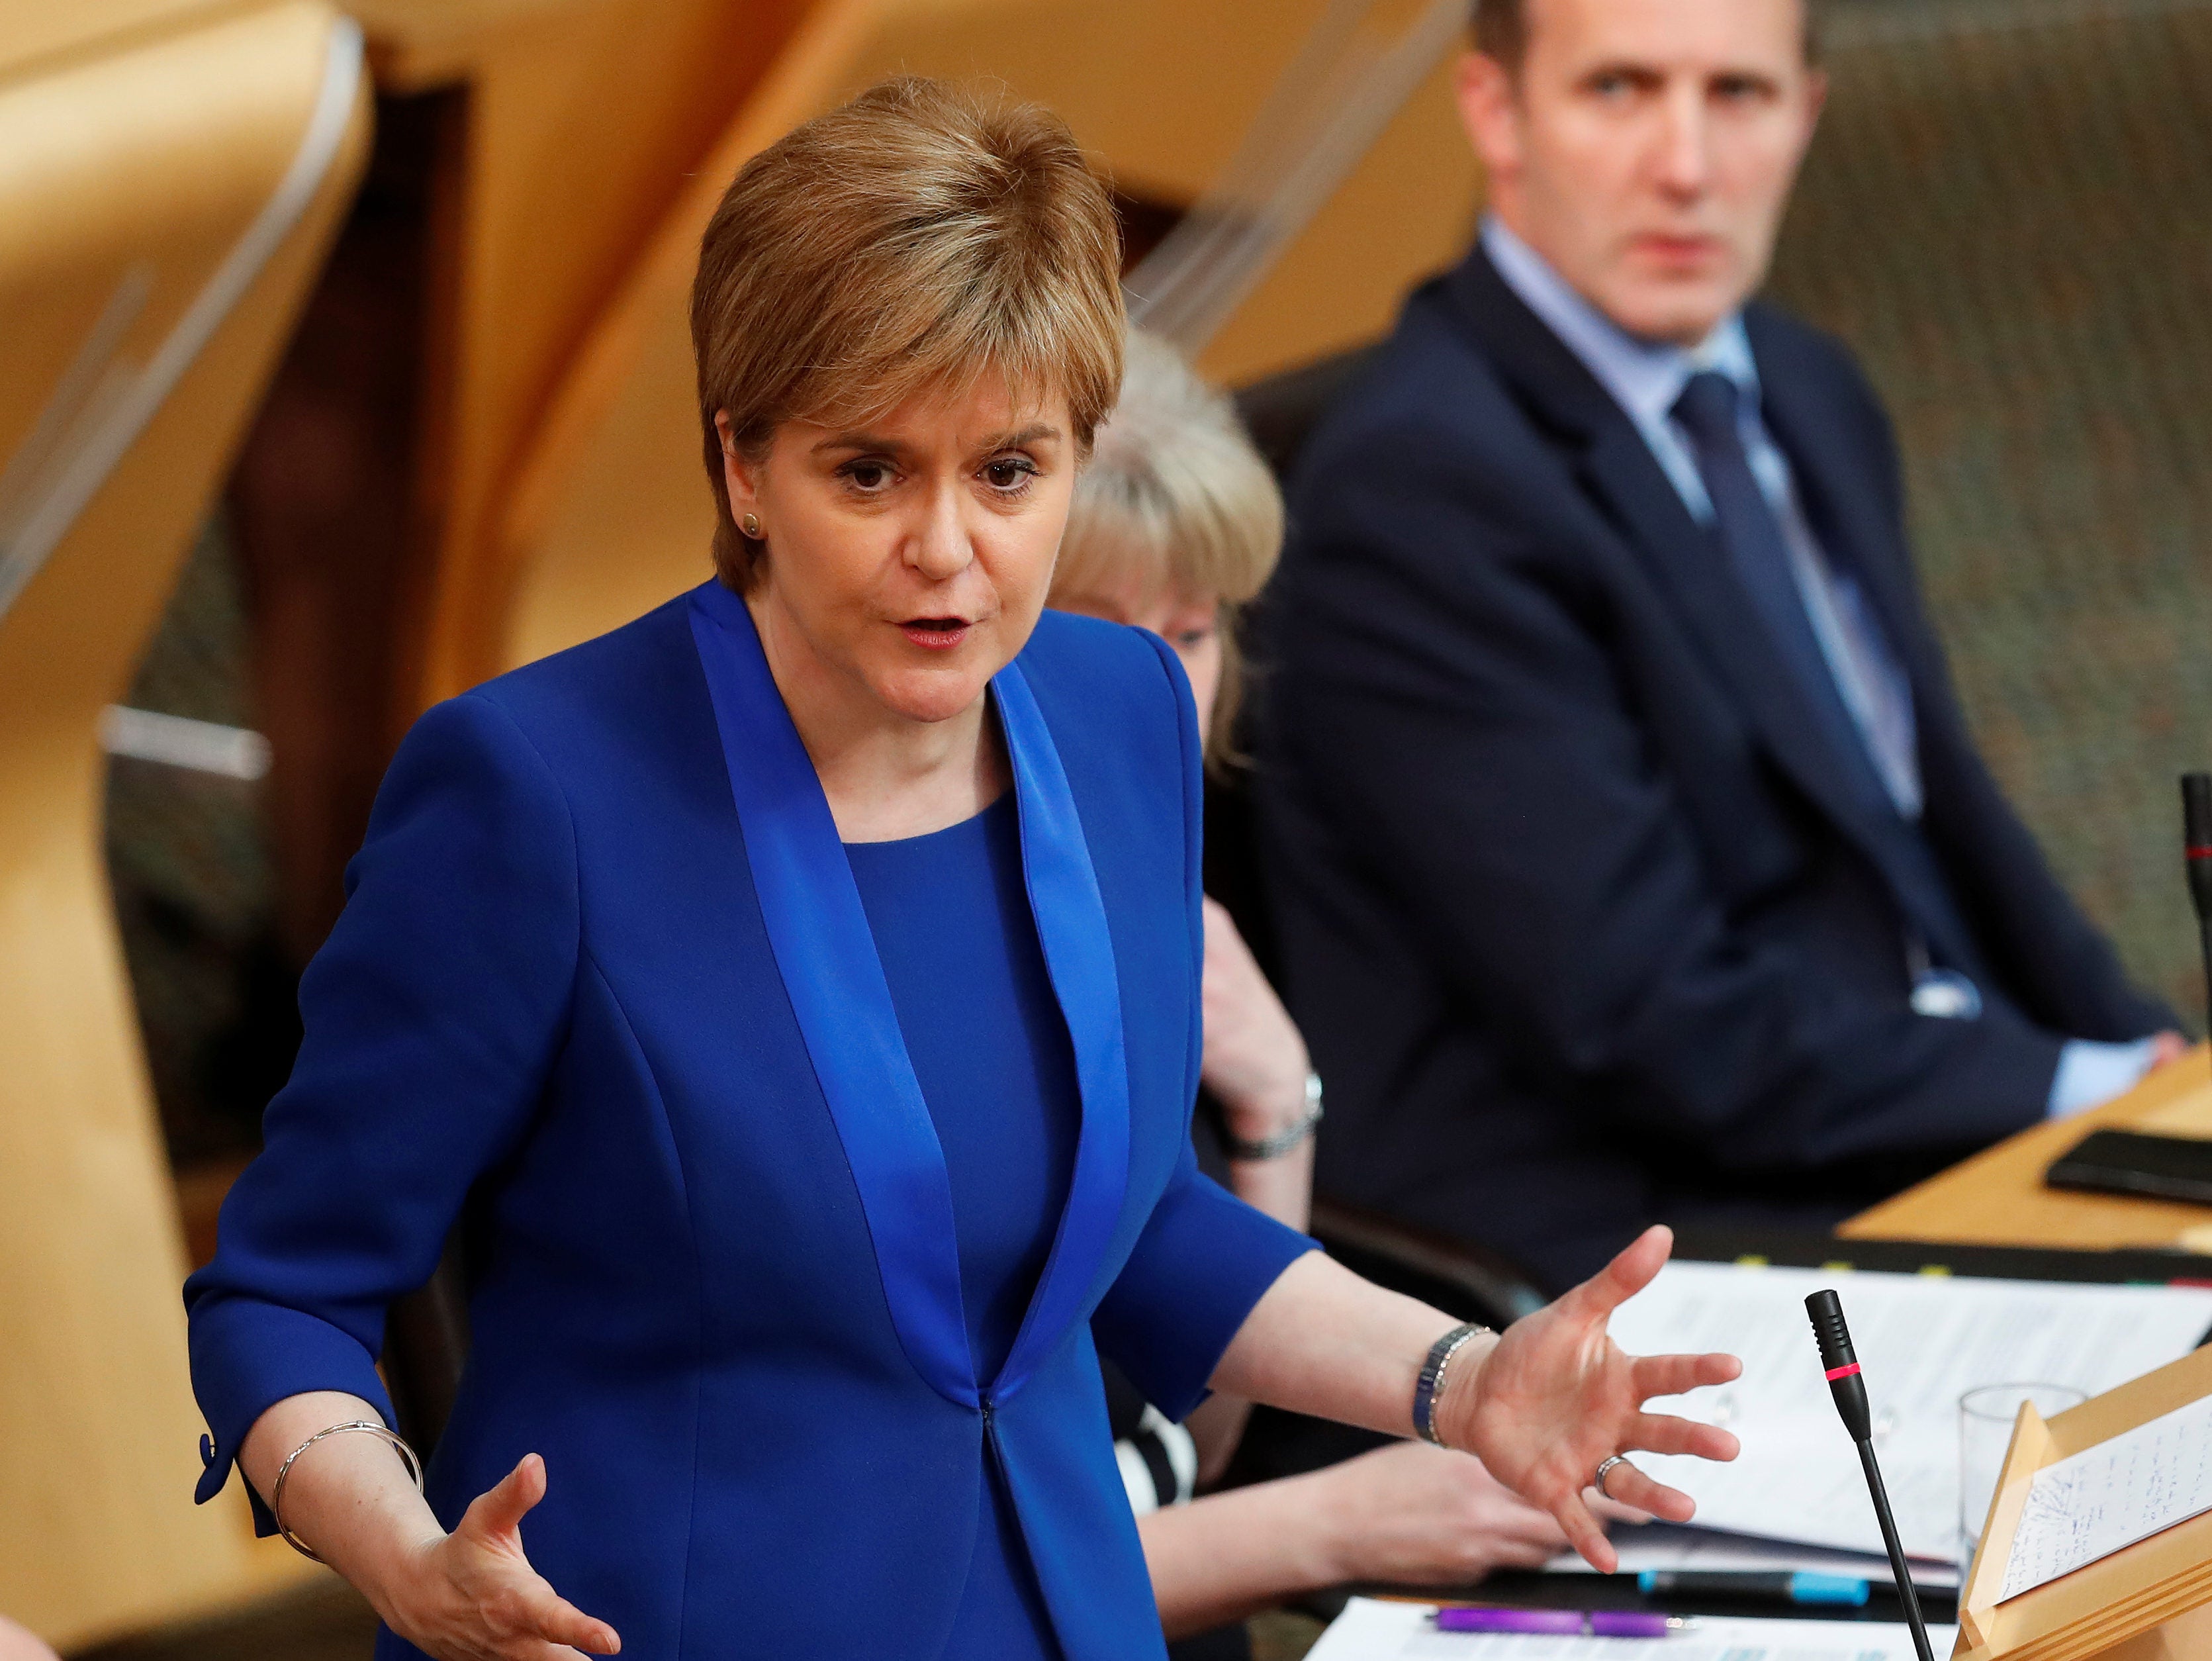 Scottish Parliament urged to review Freedom of Information amid concerns over lack of transparency